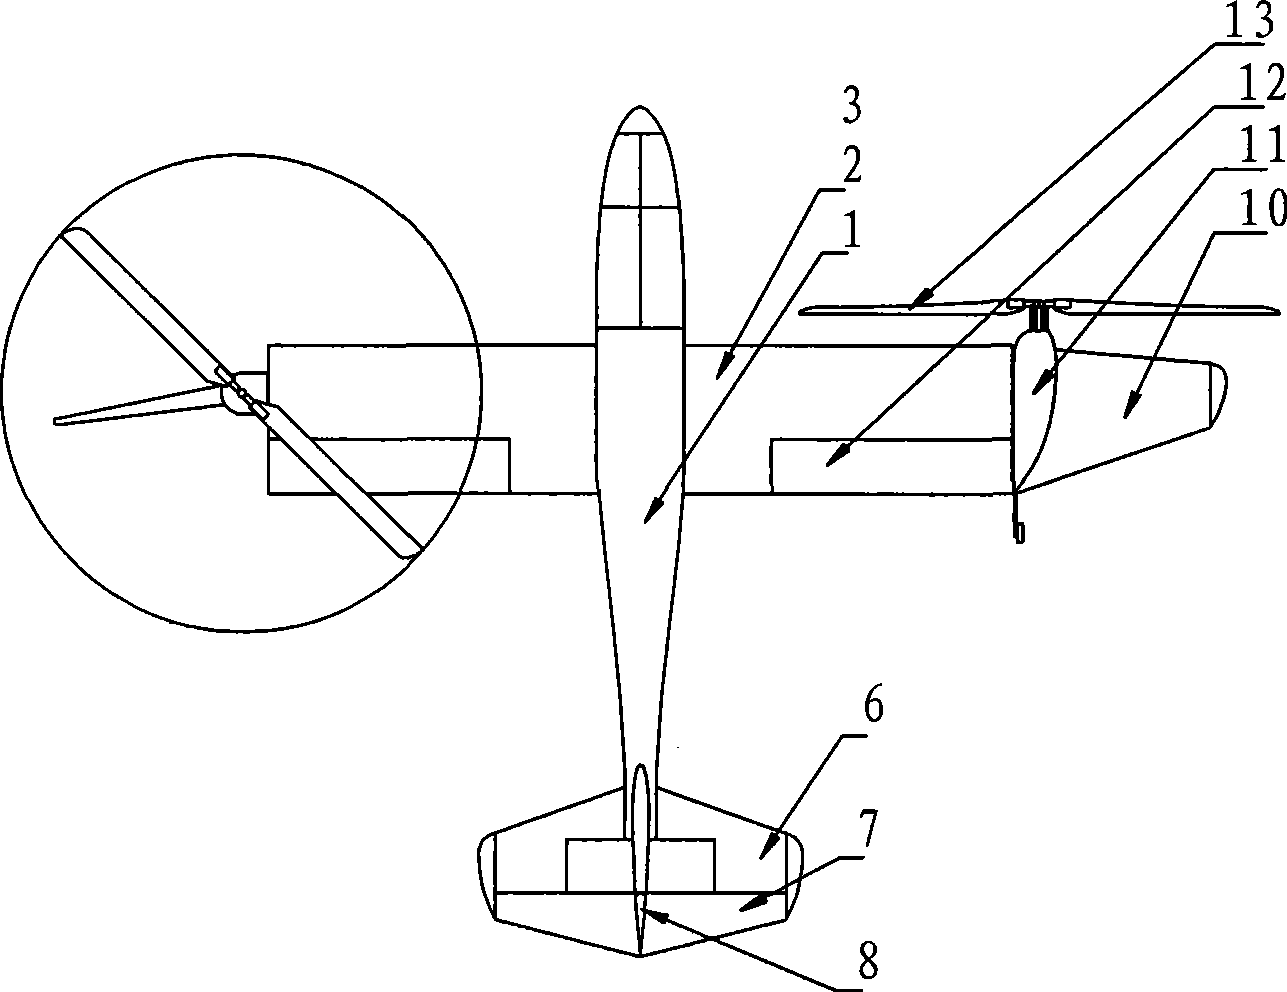 Tilt-rotor plane operated and propelled by thrust scull and slipstream rudder